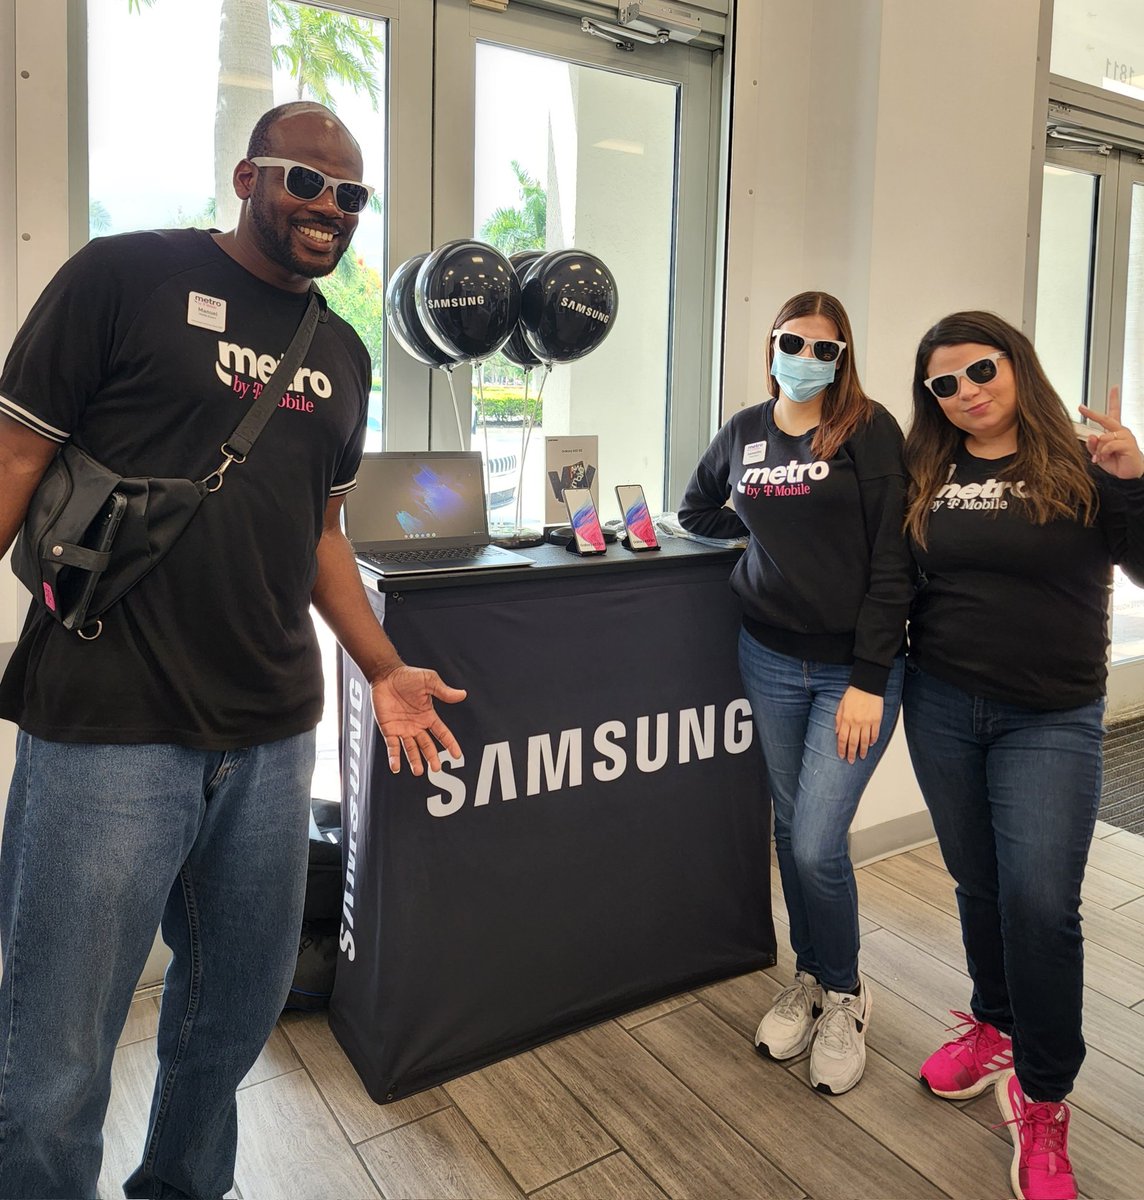 This store is so bright you have to wear shades!!!! Visit us in #Hollywood (FL) to meet your Samsung Experts, get your Chromebook Go and get ready for #back2school! Love to share with the No2 store in the country! @KatyaRaskin @AnnieG_FL @MariCalcano @TonyCBerger @pavelmiranda